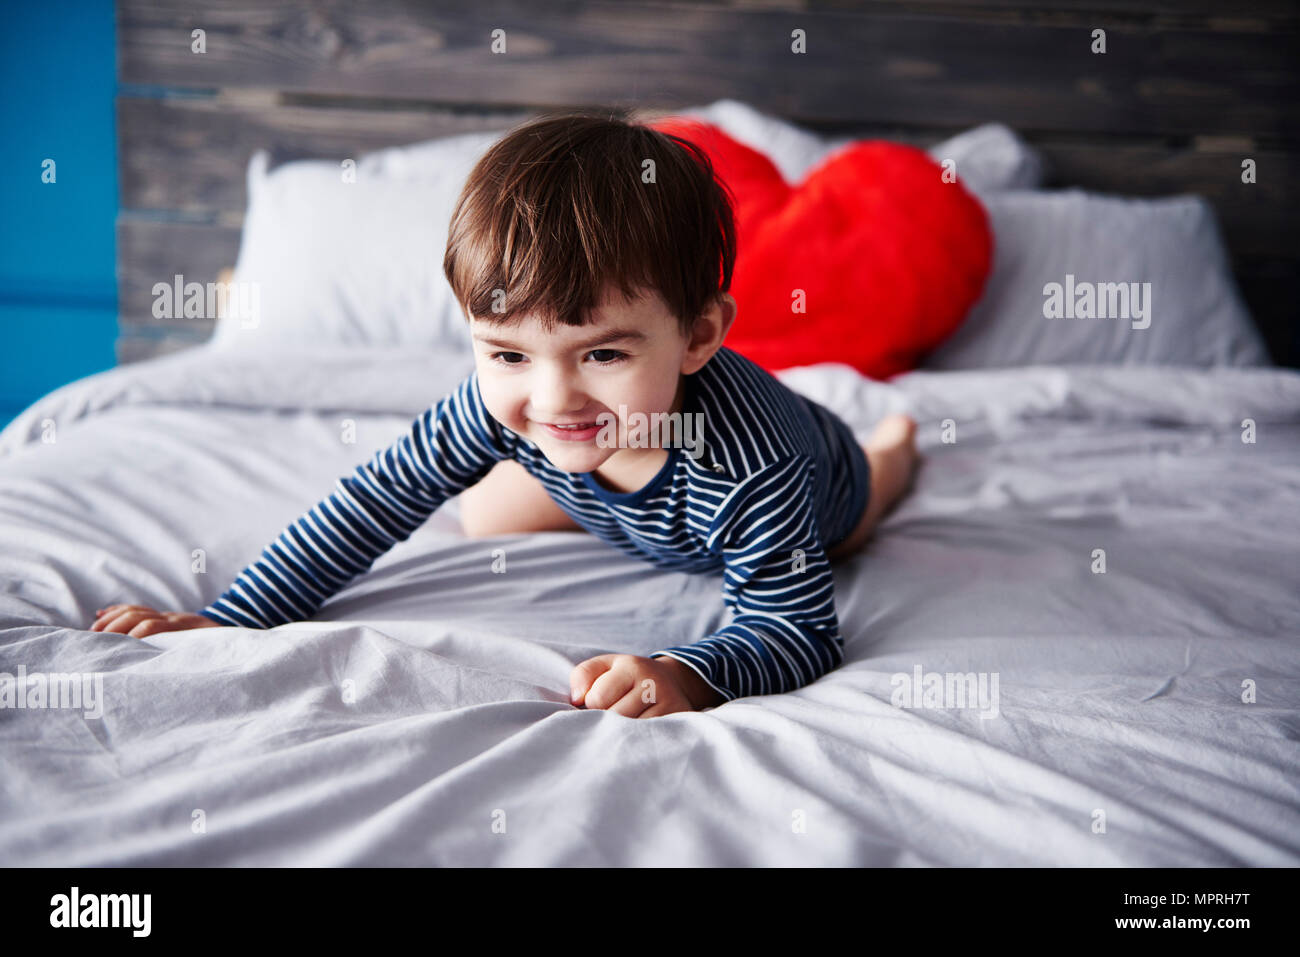 Portrait of smiling toddler crouching on bed Stock Photo